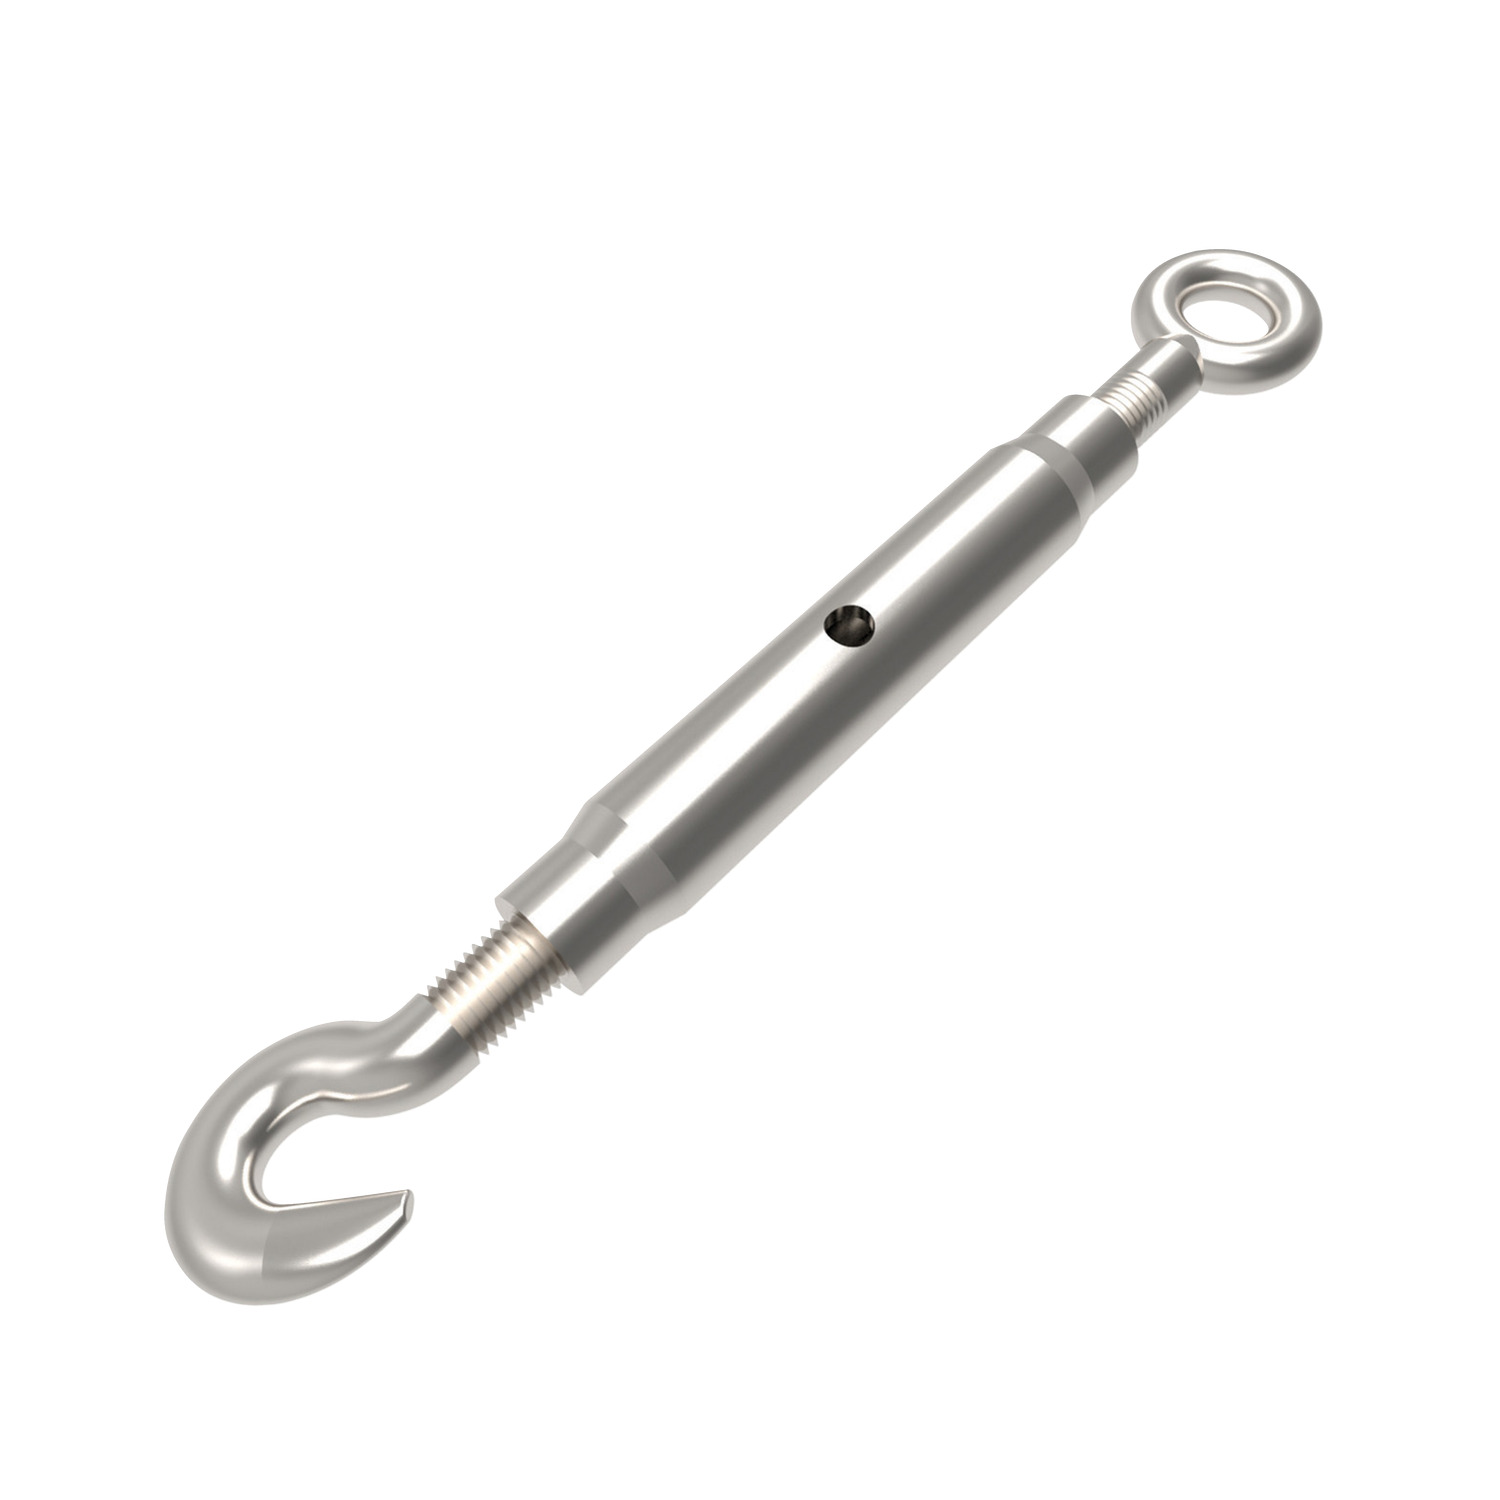 Hook & Eye Pipe Body Turnbuckles A4 Stainless steel turnbuckles with hook to eye end. Manufactured to DIN 1478. Sizes ranging from M6 to M16. Lengths from 110mm to 170mm.